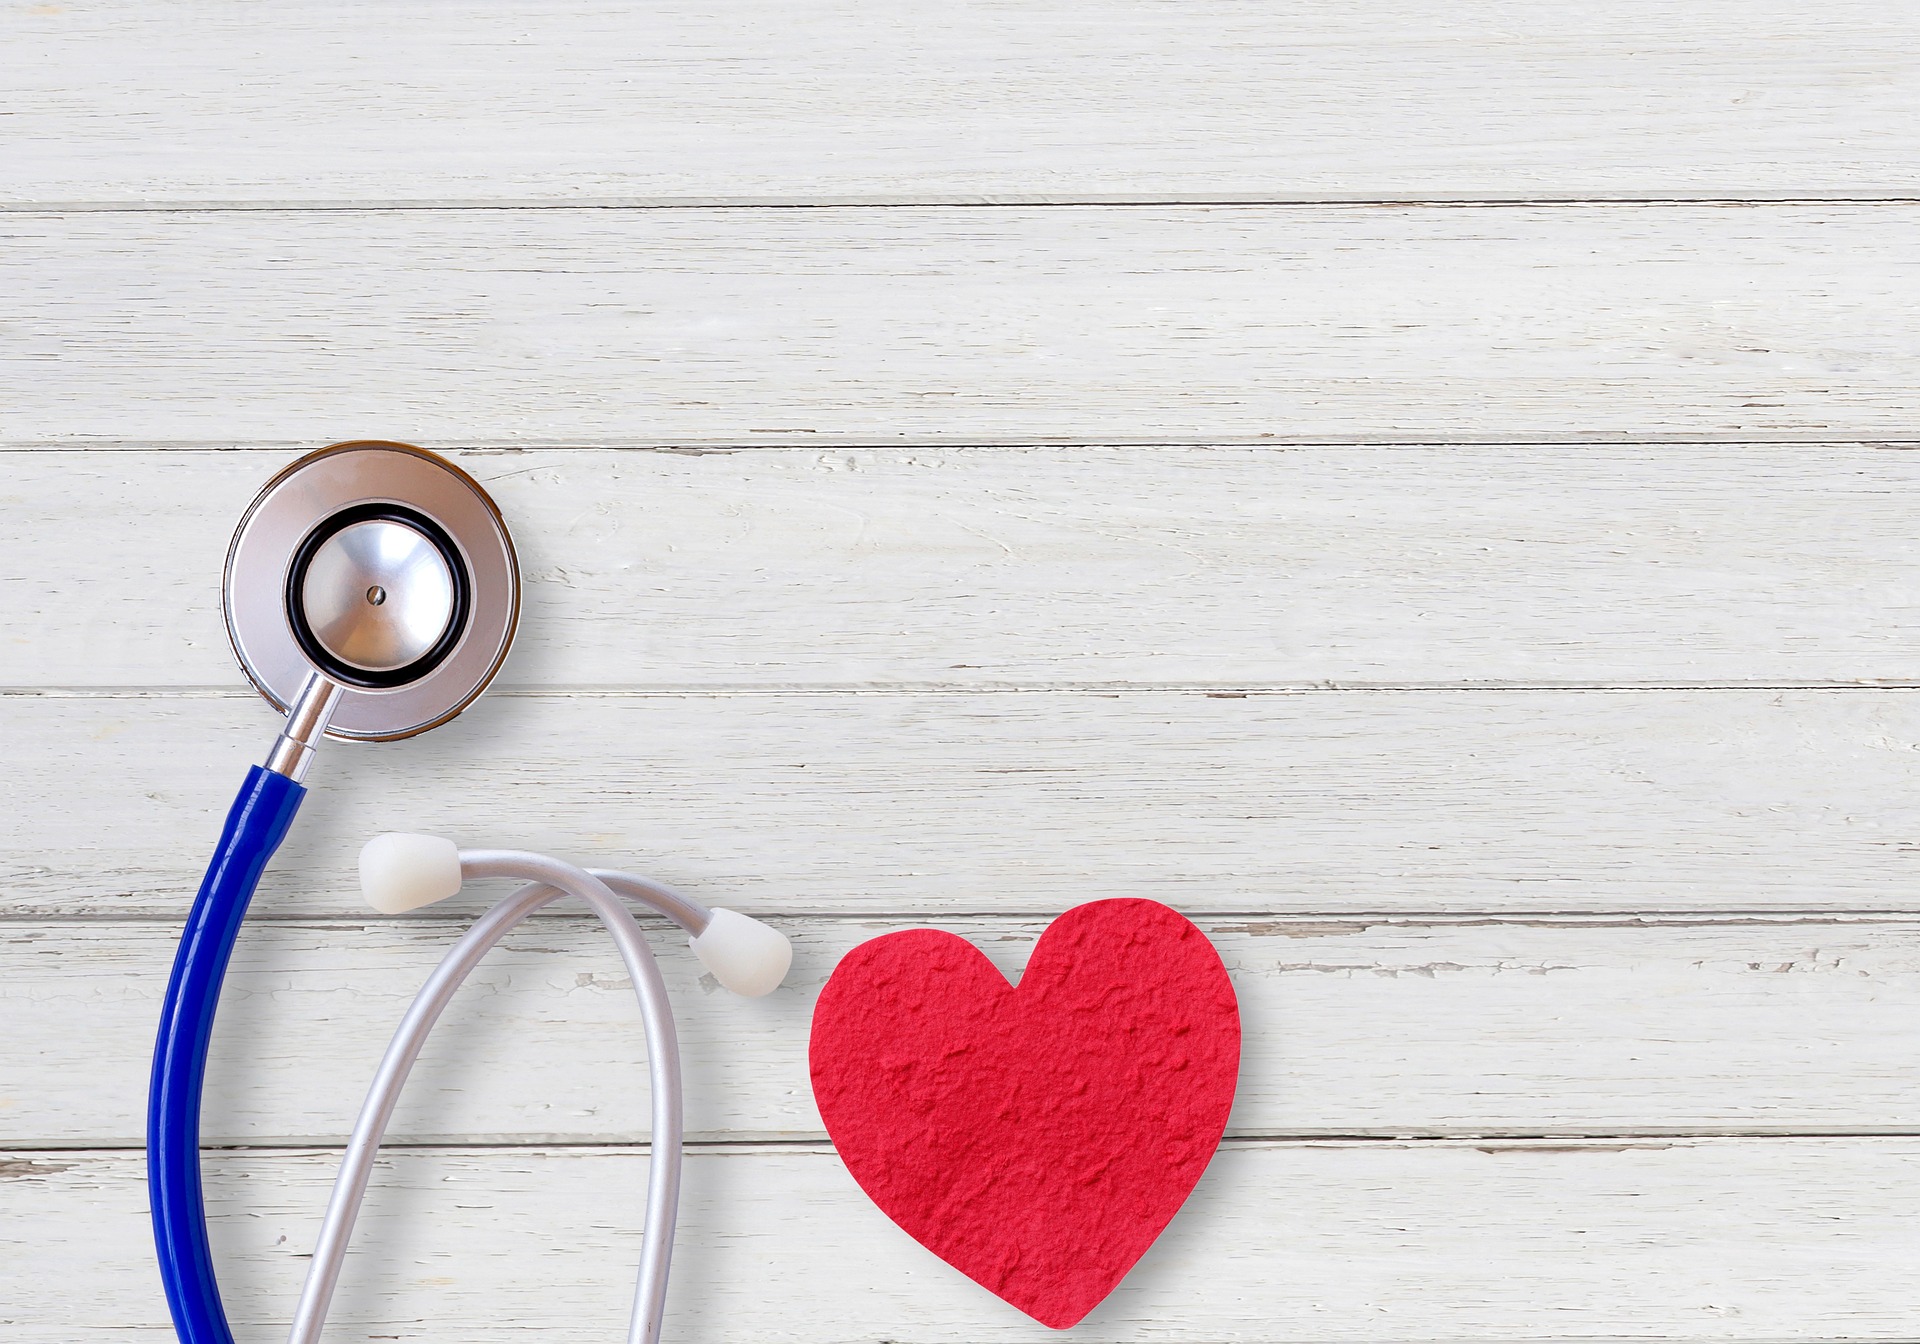 stethoscope and heart on wood background